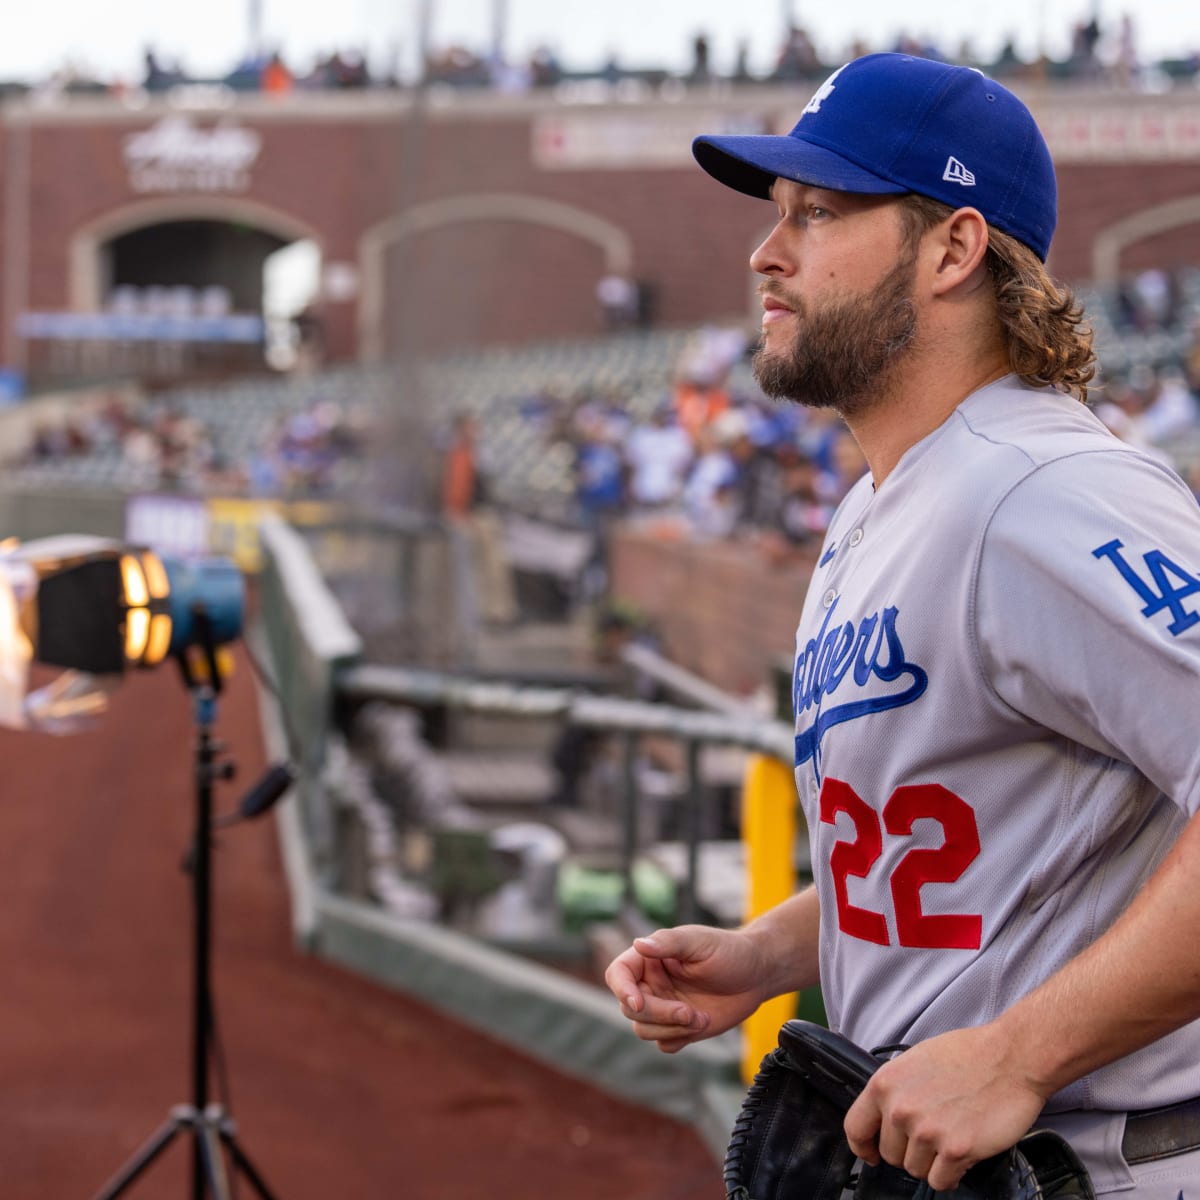 5 things to know about Dodgers pitcher Clayton Kershaw – NBC New York